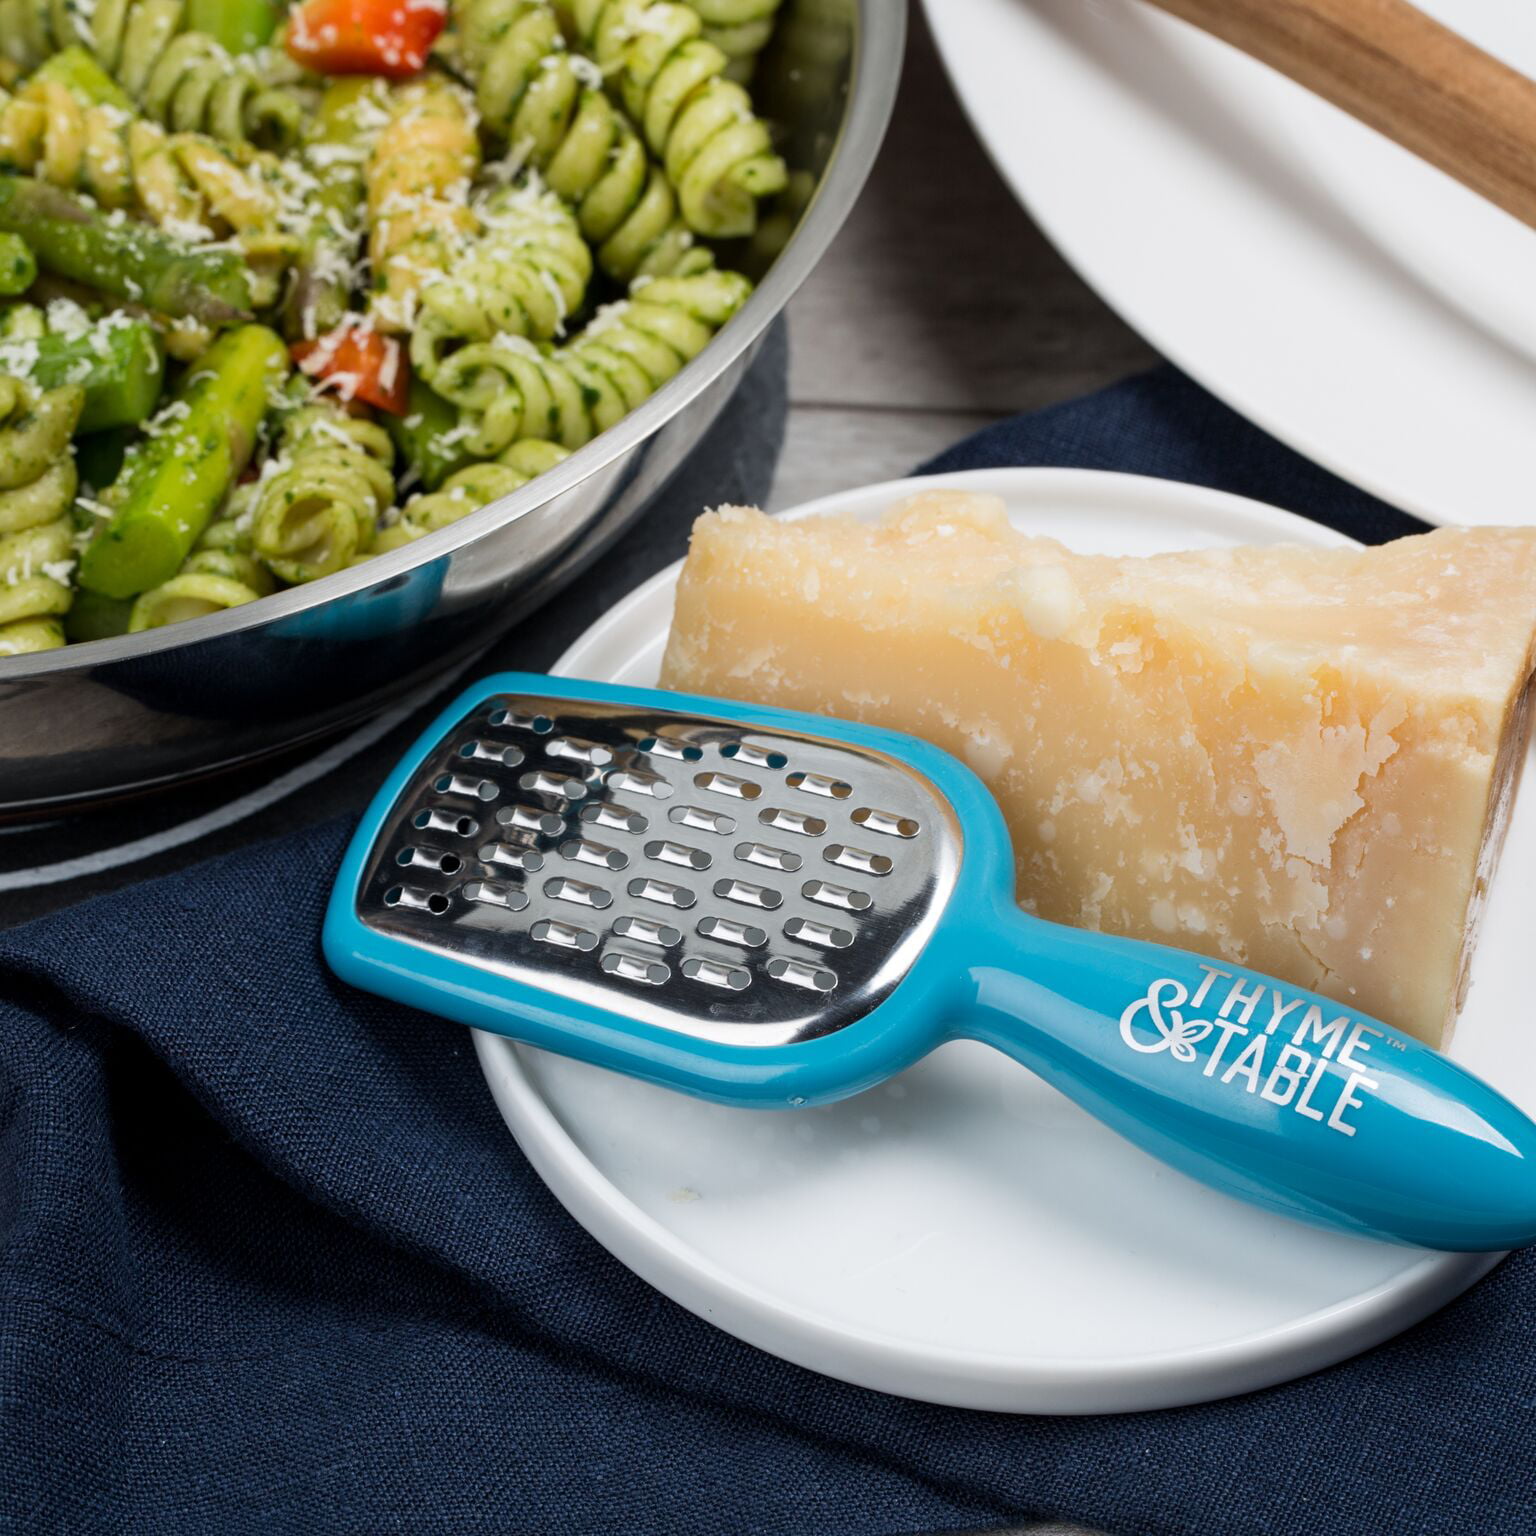 Thyme & Table Teal Stainless Steel Mini Grater